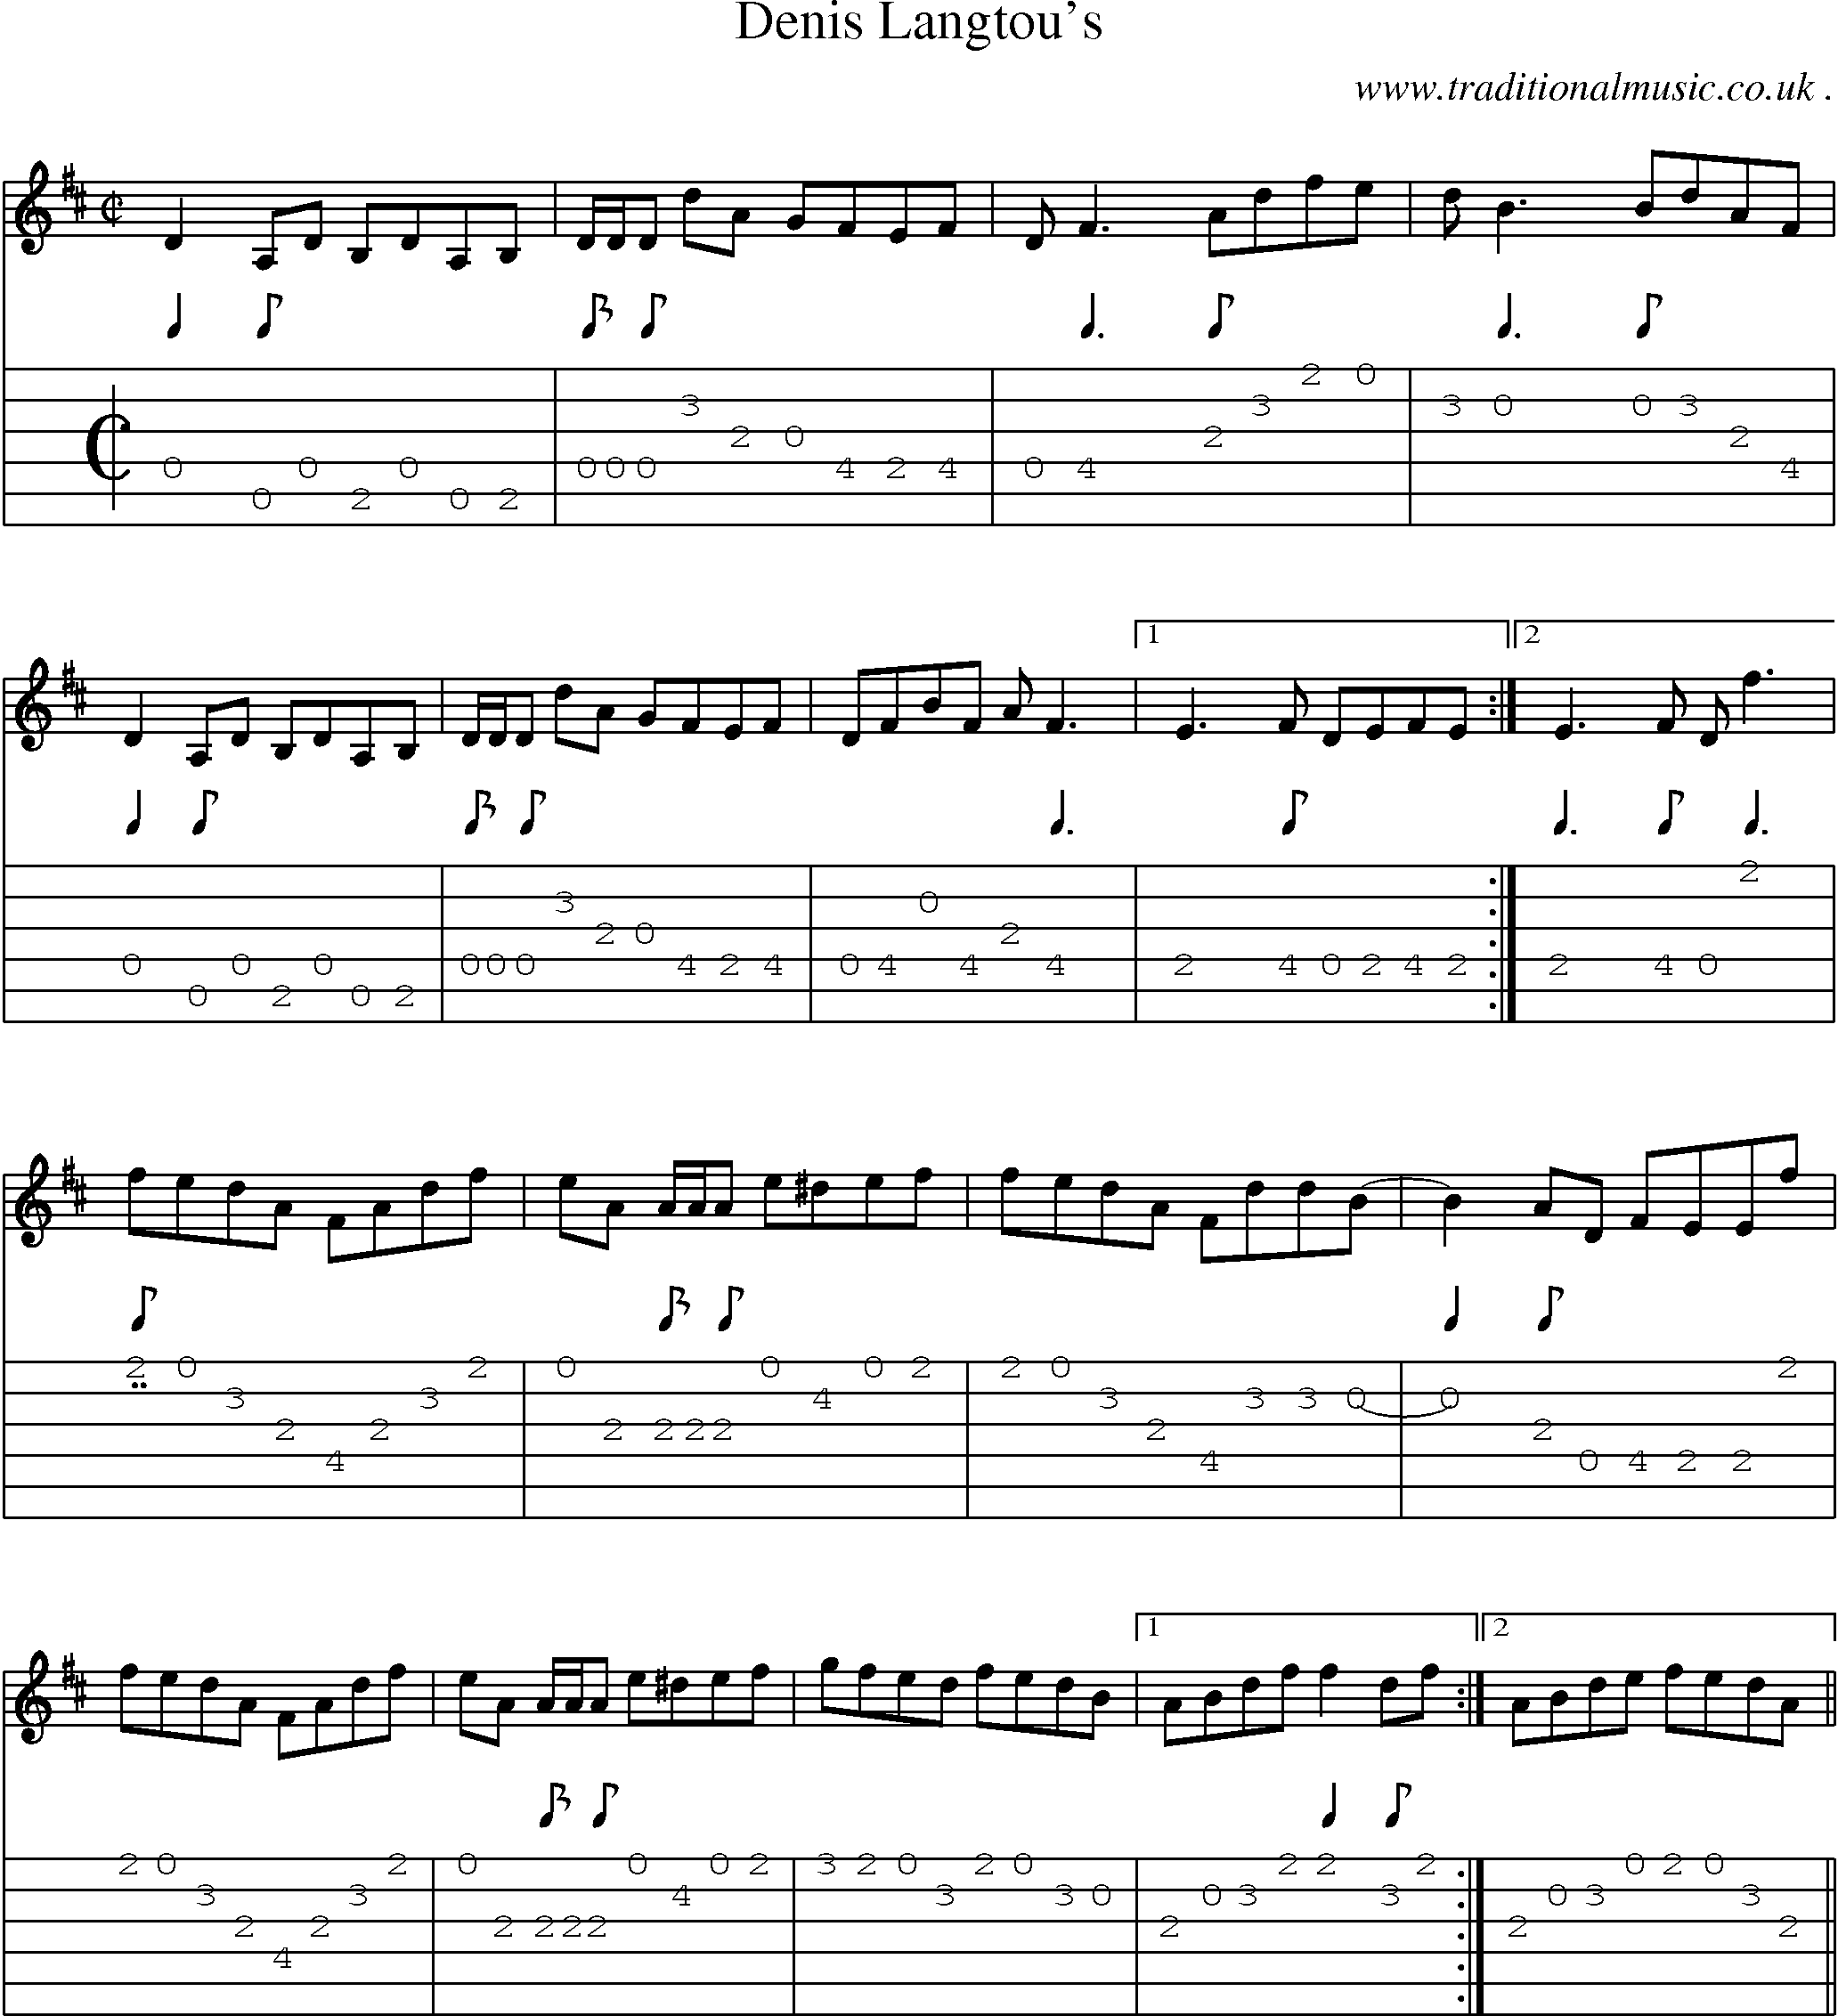 Sheet-Music and Guitar Tabs for Denis Langtous